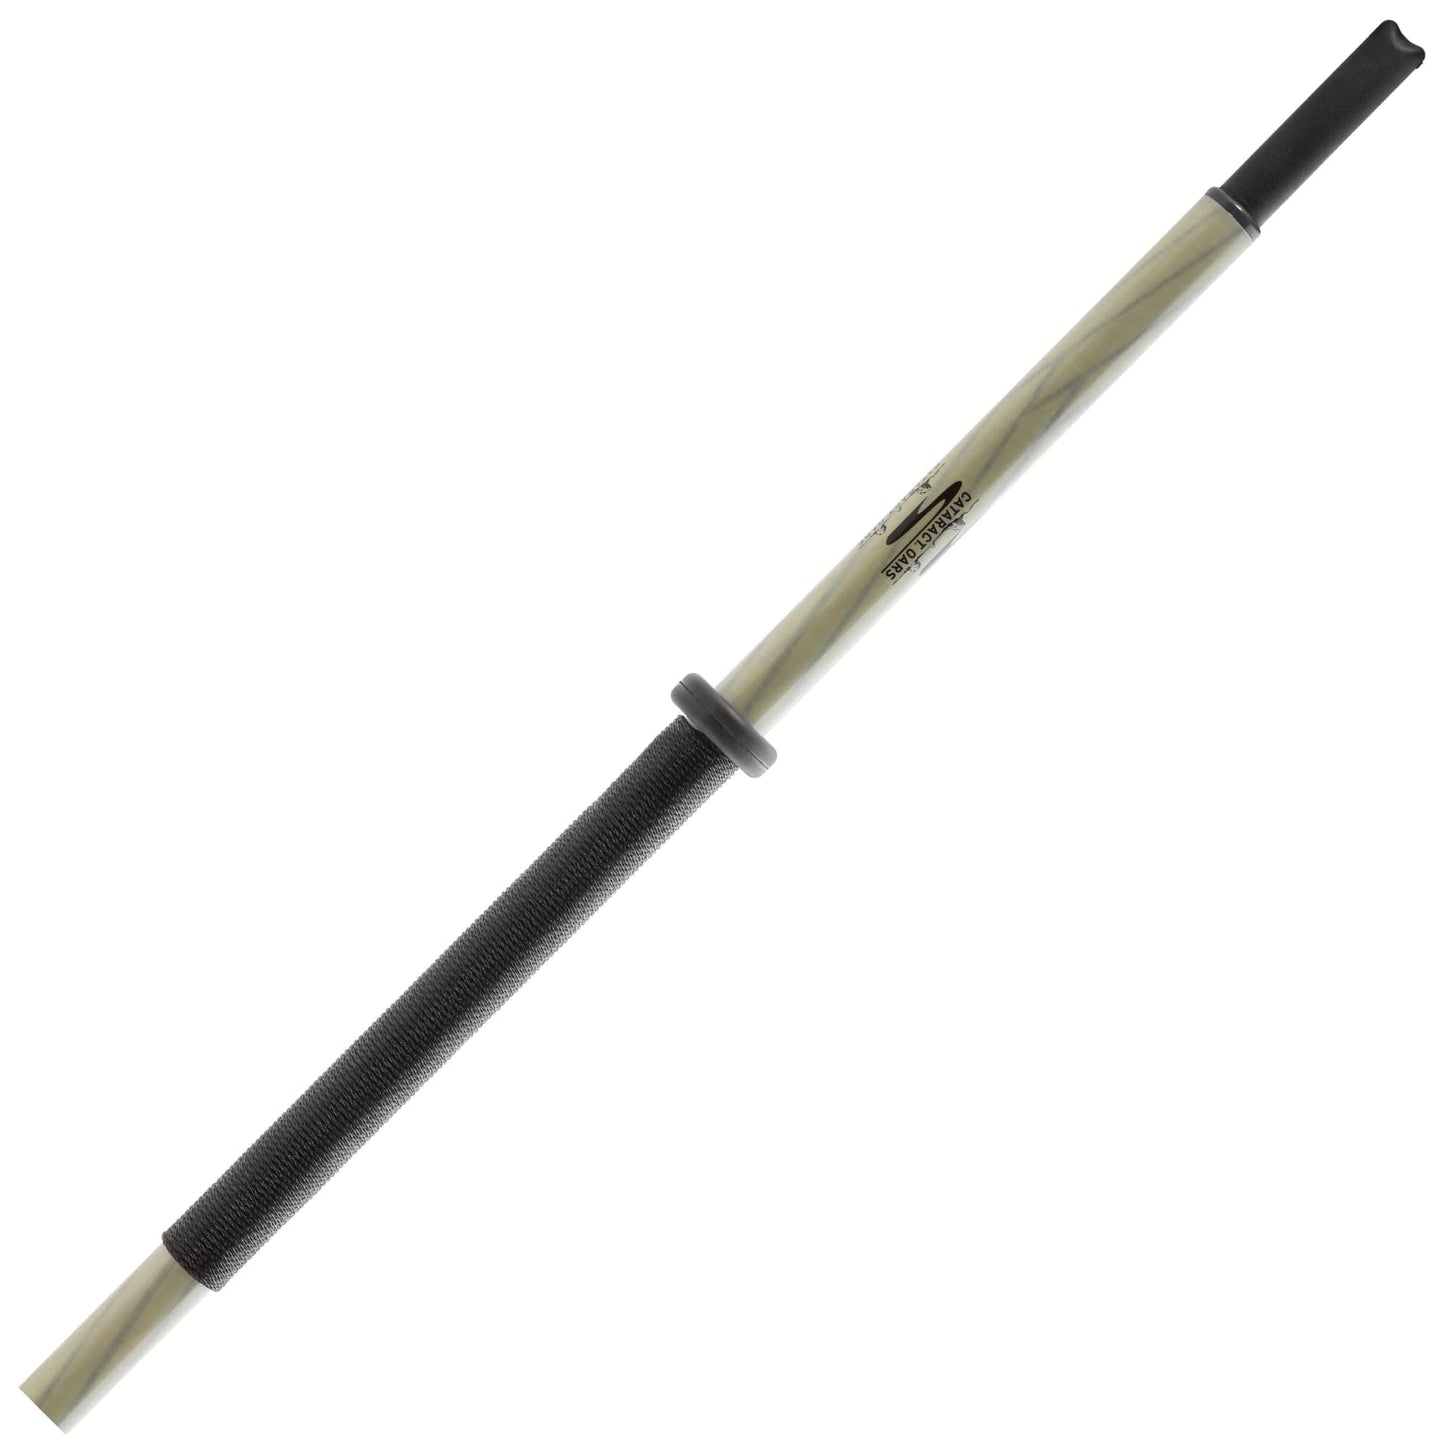 Featuring the Cataract SGG Rope Wrap Counter Balanced Oar Shaft oar manufactured by Cataract shown here from a second angle.